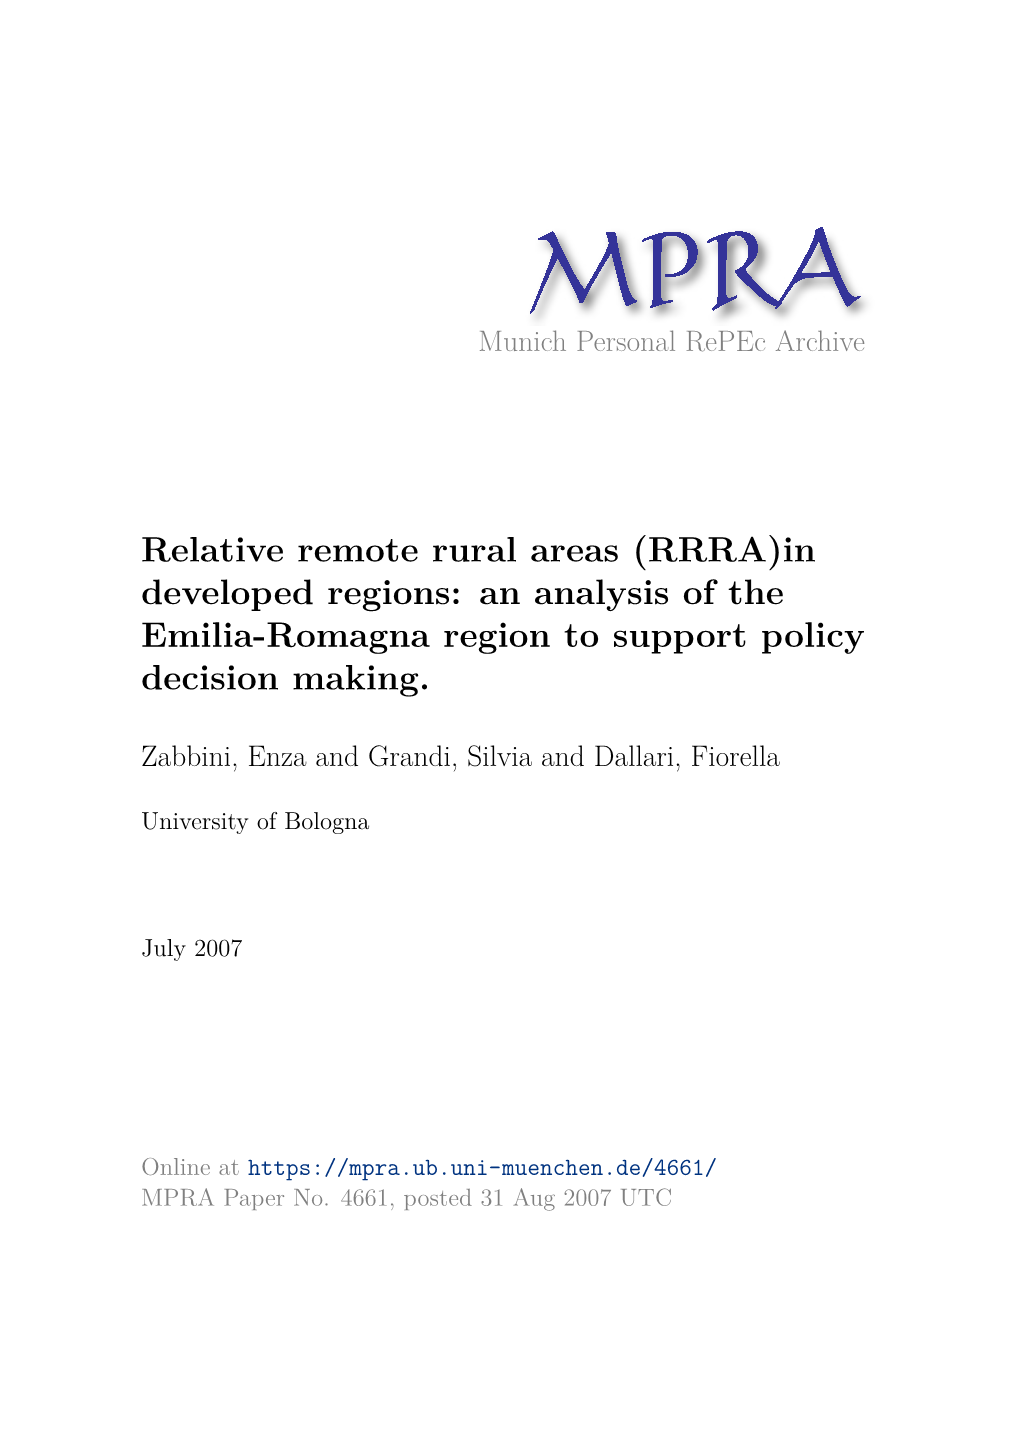 Relative Remote Rural Areas (RRRA)In Developed Regions: an Analysis of the Emilia-Romagna Region to Support Policy Decision Making